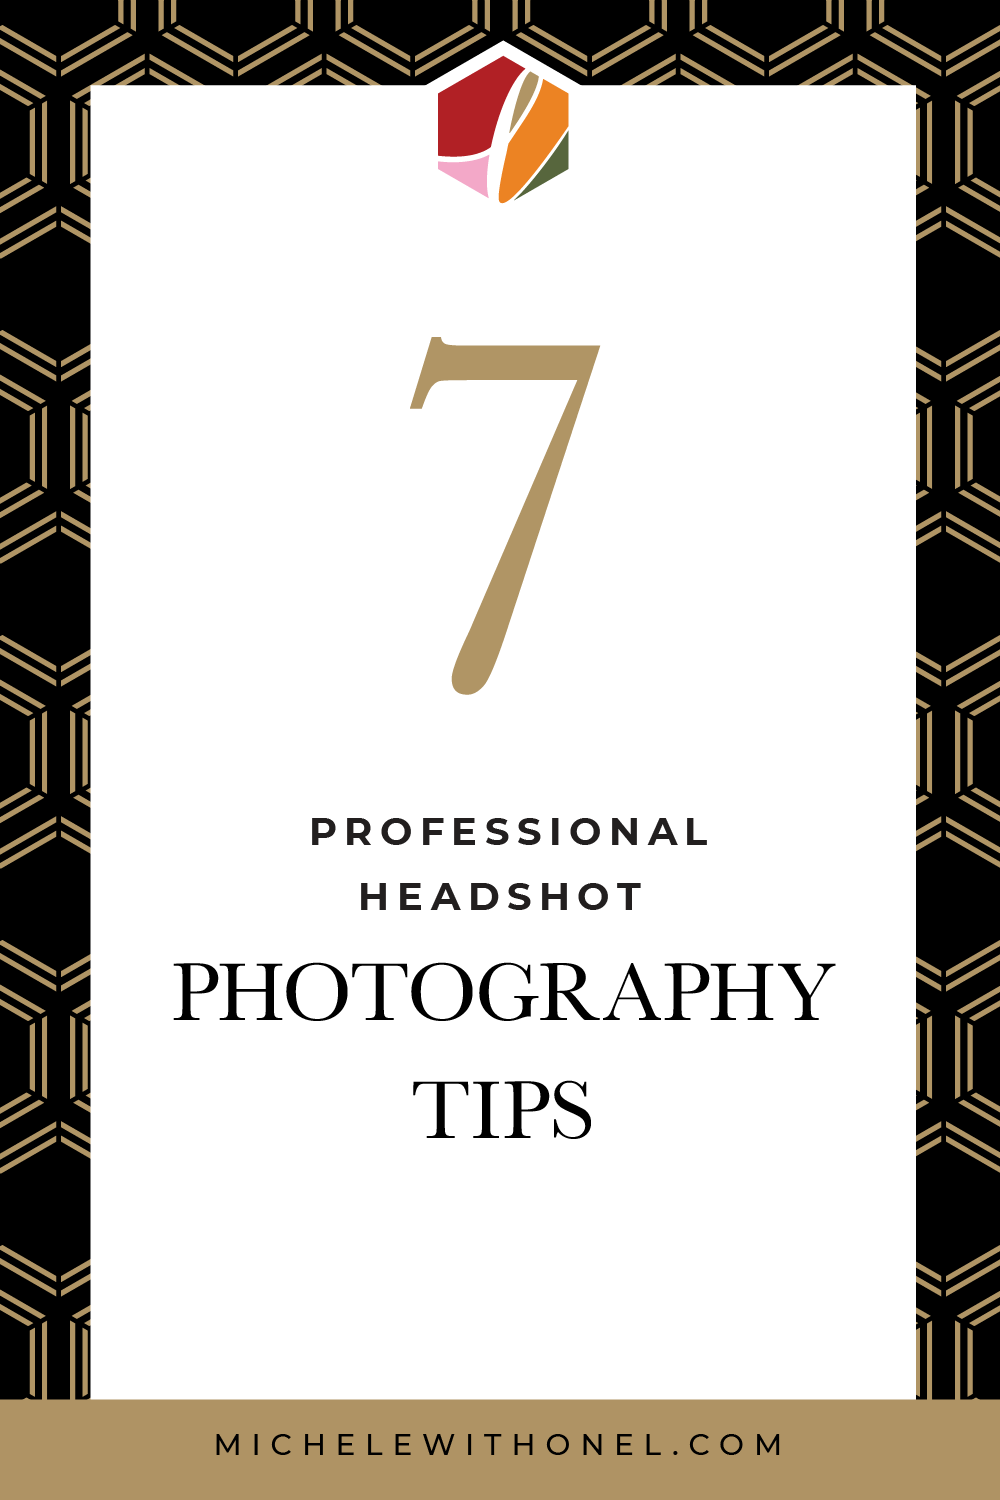 Looking for some business headshot tips? This post is for you! Learn the top reasons why you need to invest in professional headshot photography and update your brand photos—including corporate portrait photography. #headshots #business #branding #photography